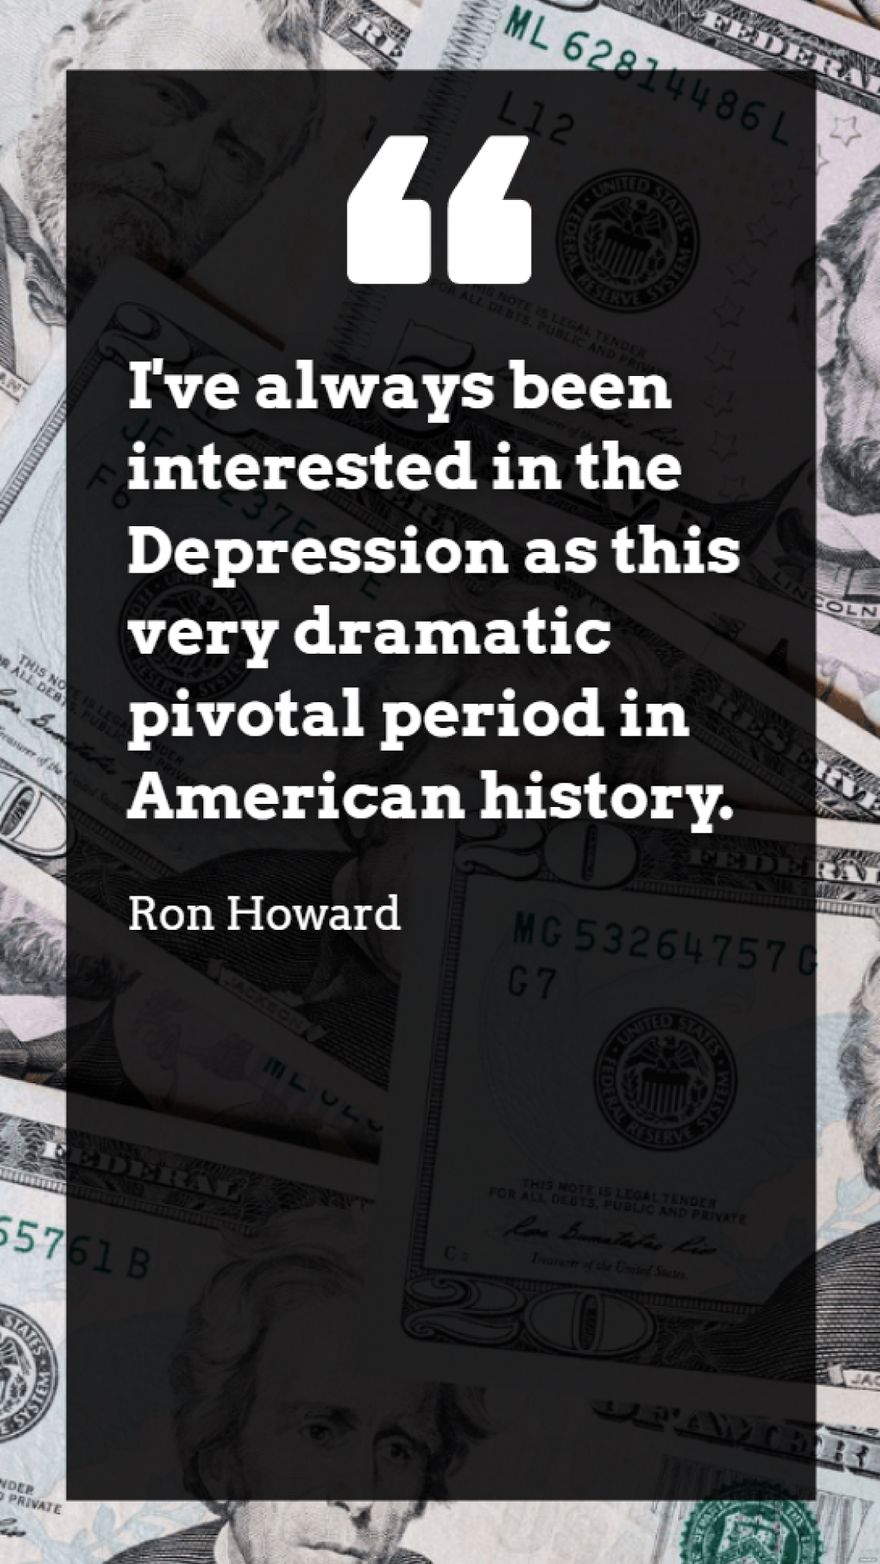 Ron Howard - I've always been interested in the Depression as this very dramatic pivotal period in American history.